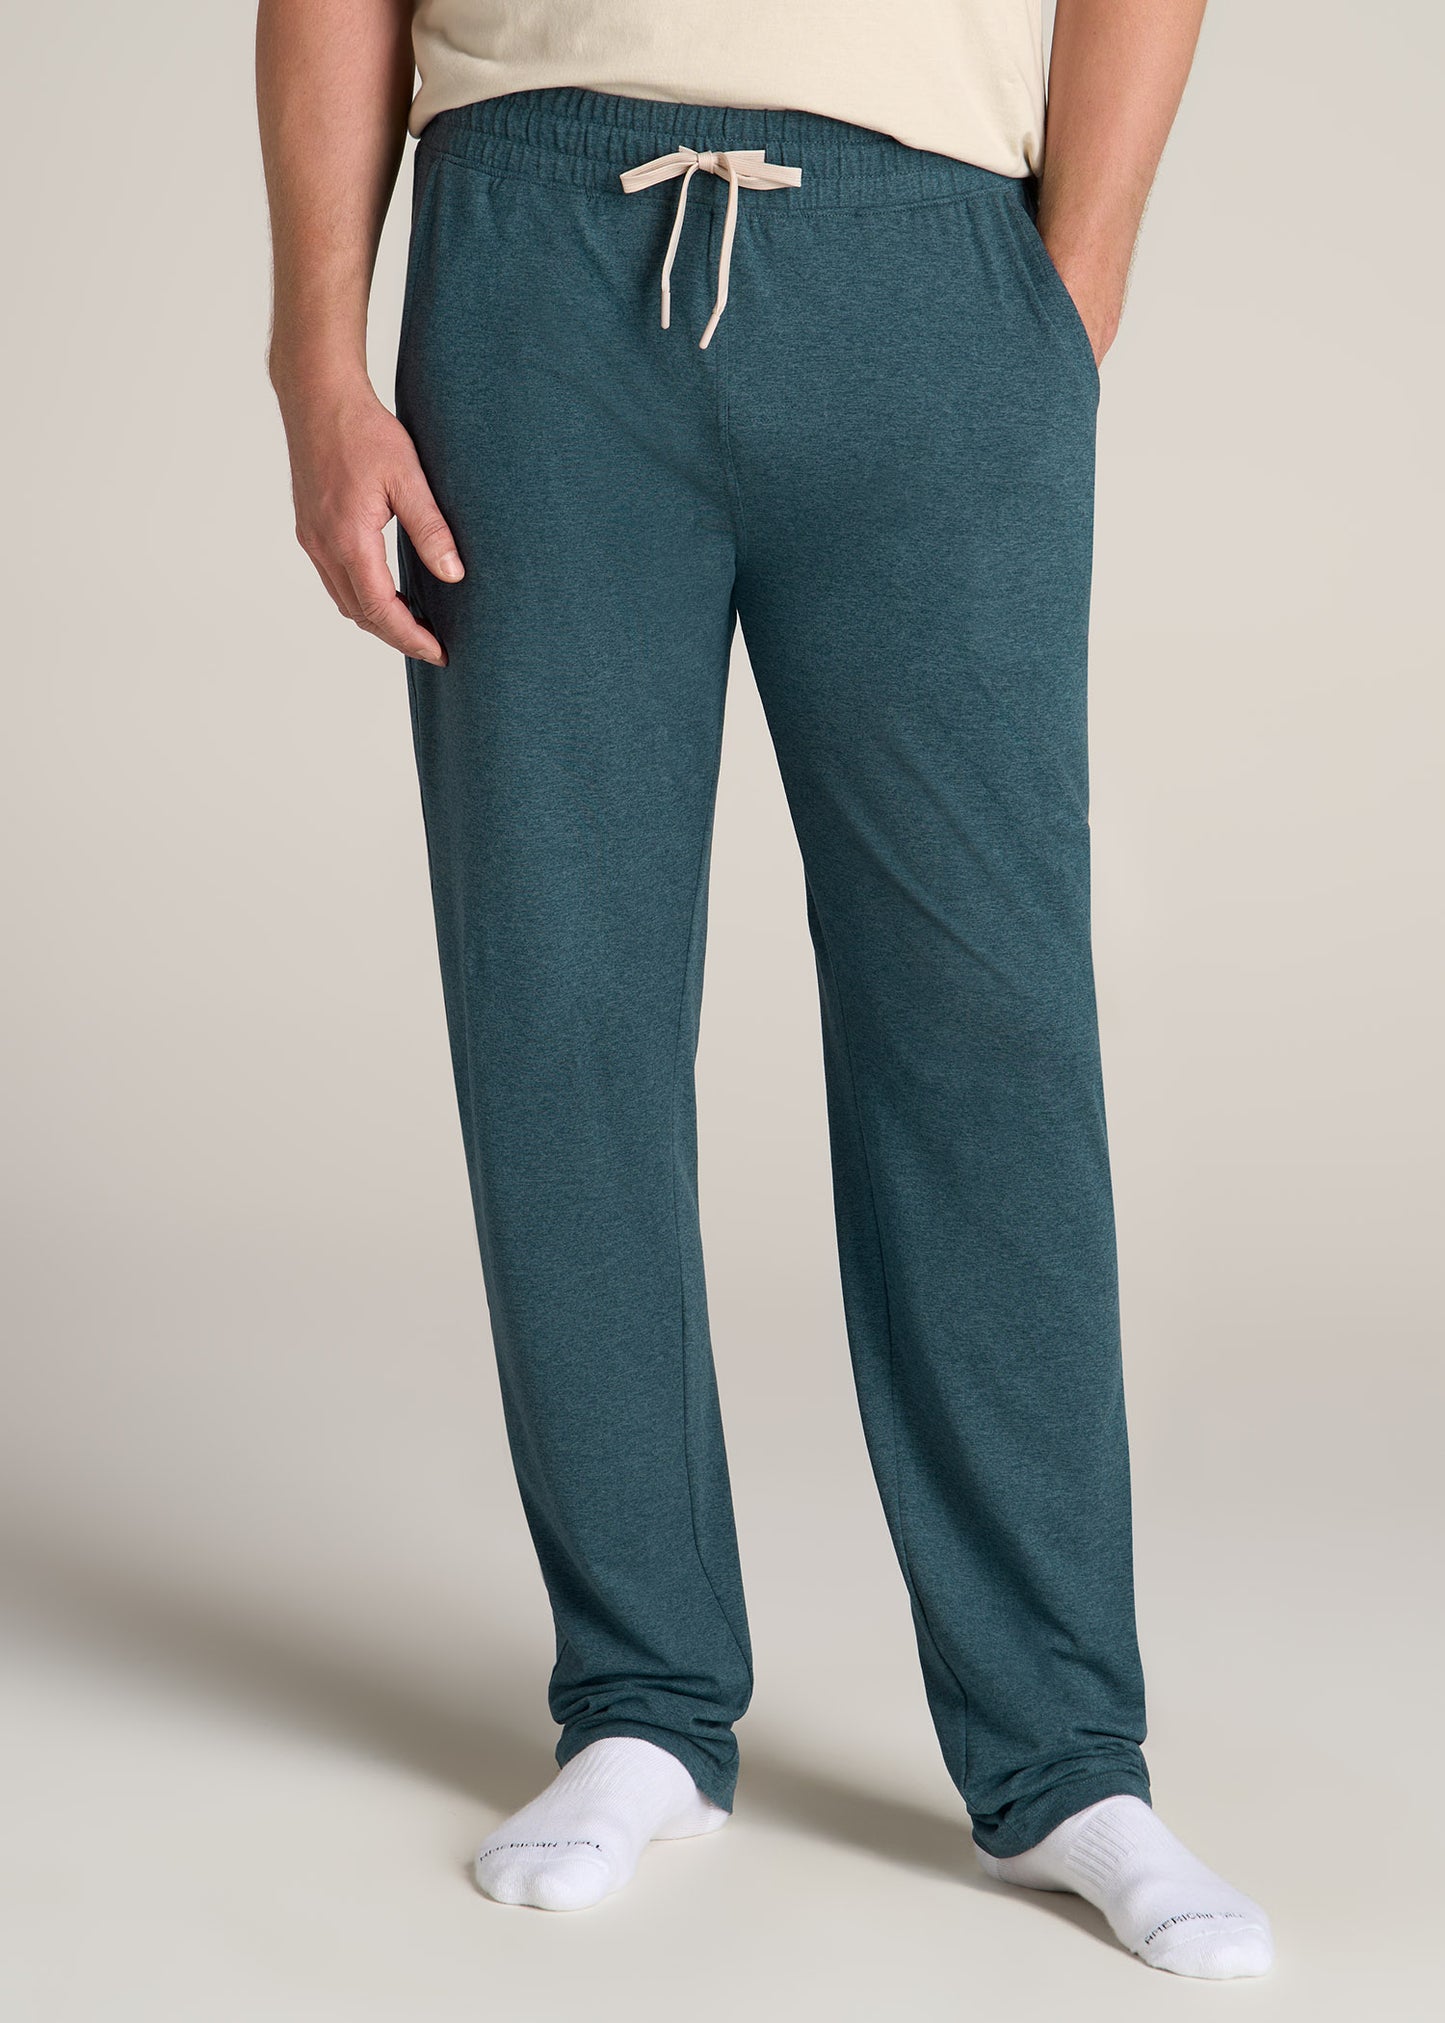 American-Tall-Men-Weekender-Stretch-Lounge-Pant-Dark-Teal-Mix-front